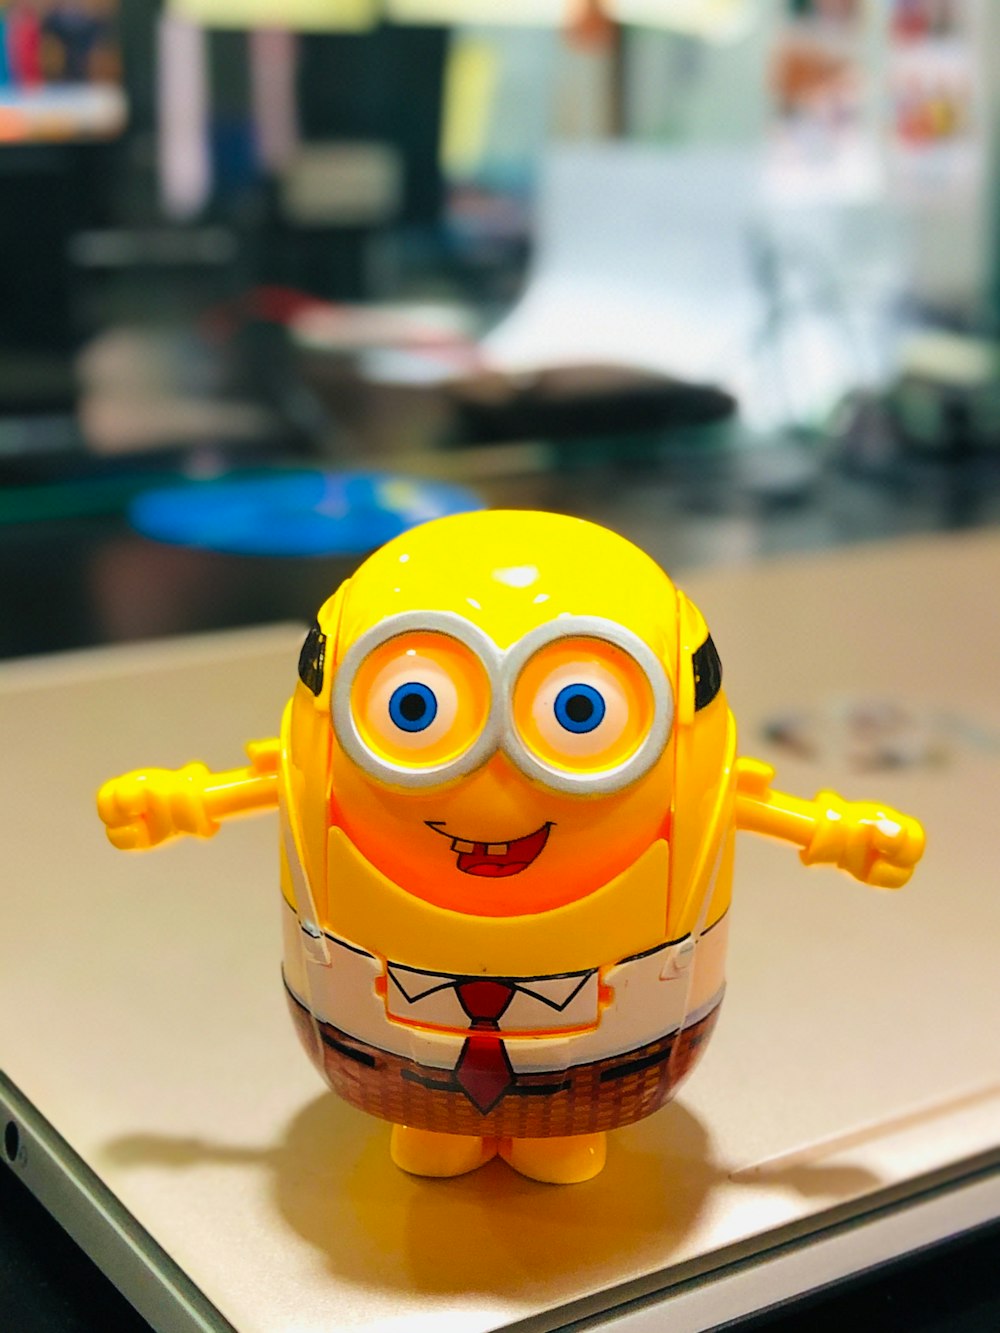 a yellow toy with eyes and a tie on a table